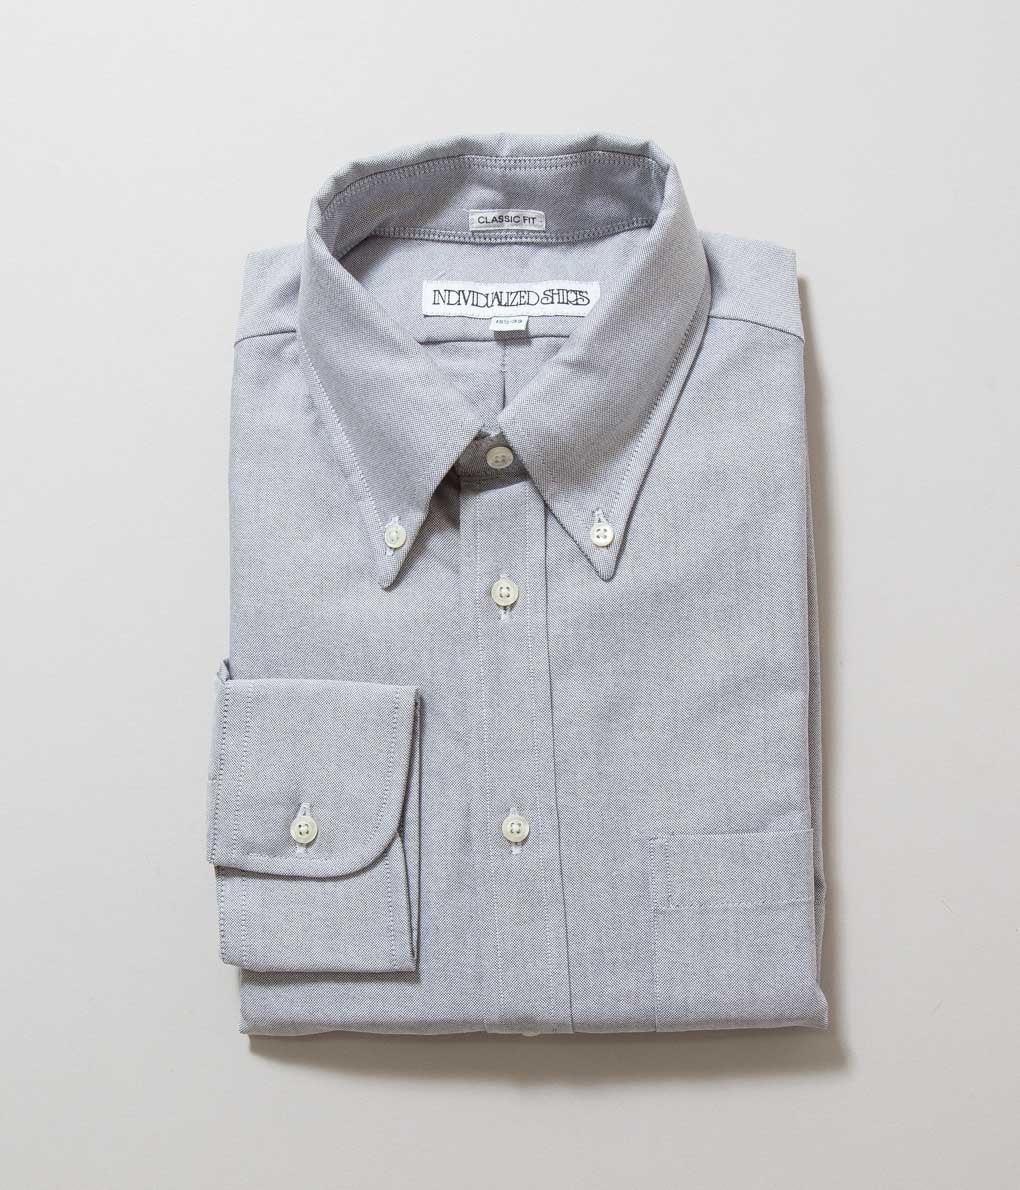 INDIVIDUALIZED SHIRTS "CAMBRIDGE OXFORD (CLASSIC FIT BUTTON DOWN SHIRT)(LIGHT GREY)"